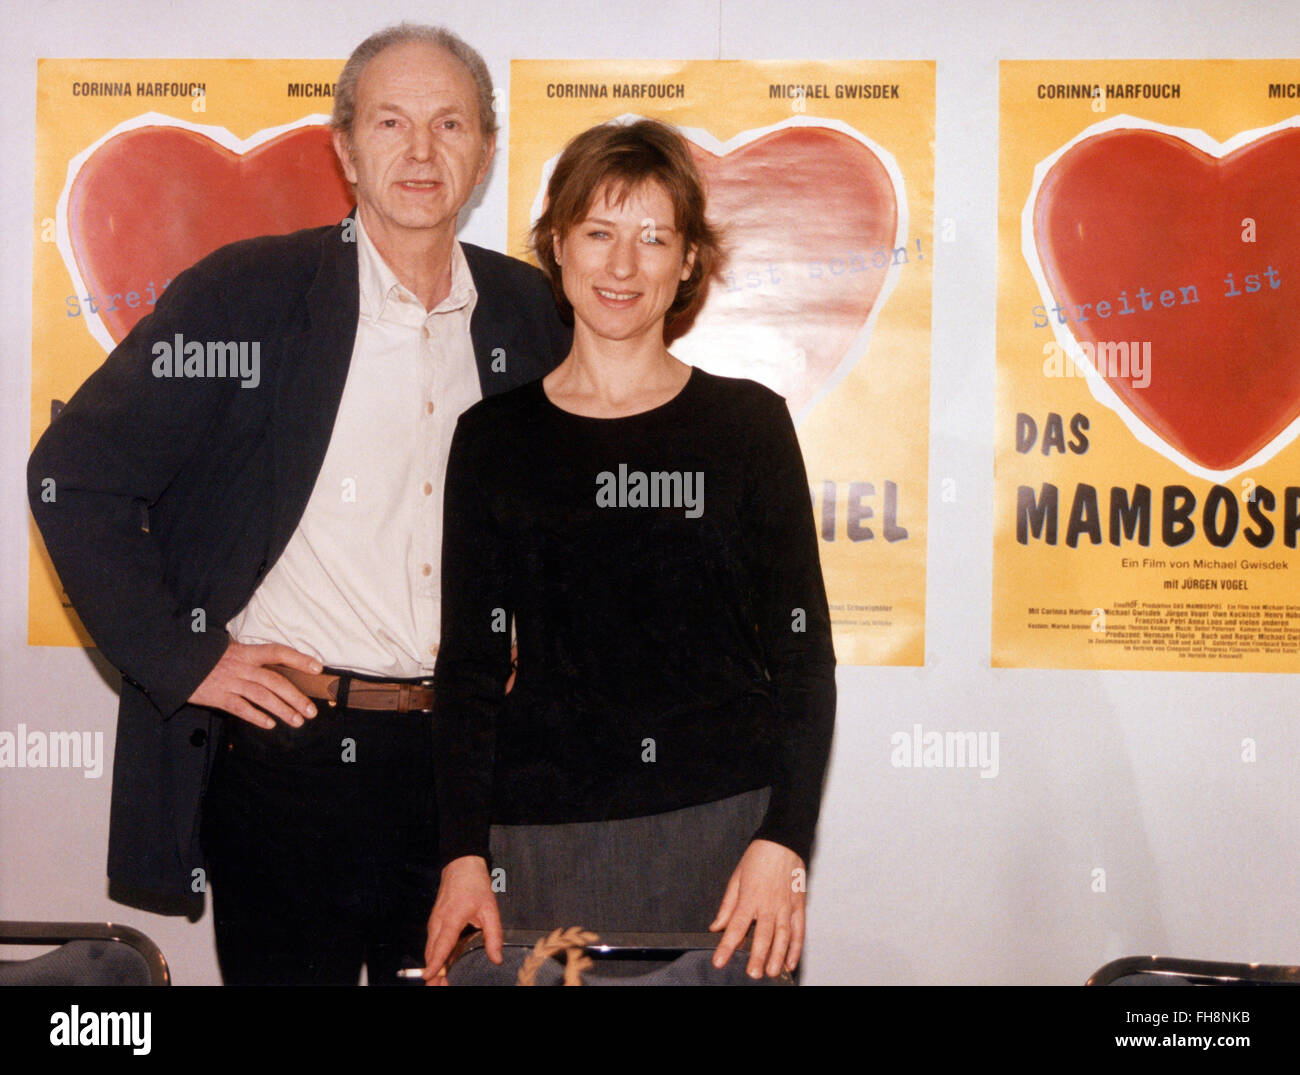 movie, 'The Big Mambo' (Das Mambospiel), DEU 1998, director: Michael Gwisdek, photo call with: director, Corinna Harfouch, Berlinale film festival, 23.2.1998, Third-Party-Permissions-Neccessary Stock Photo